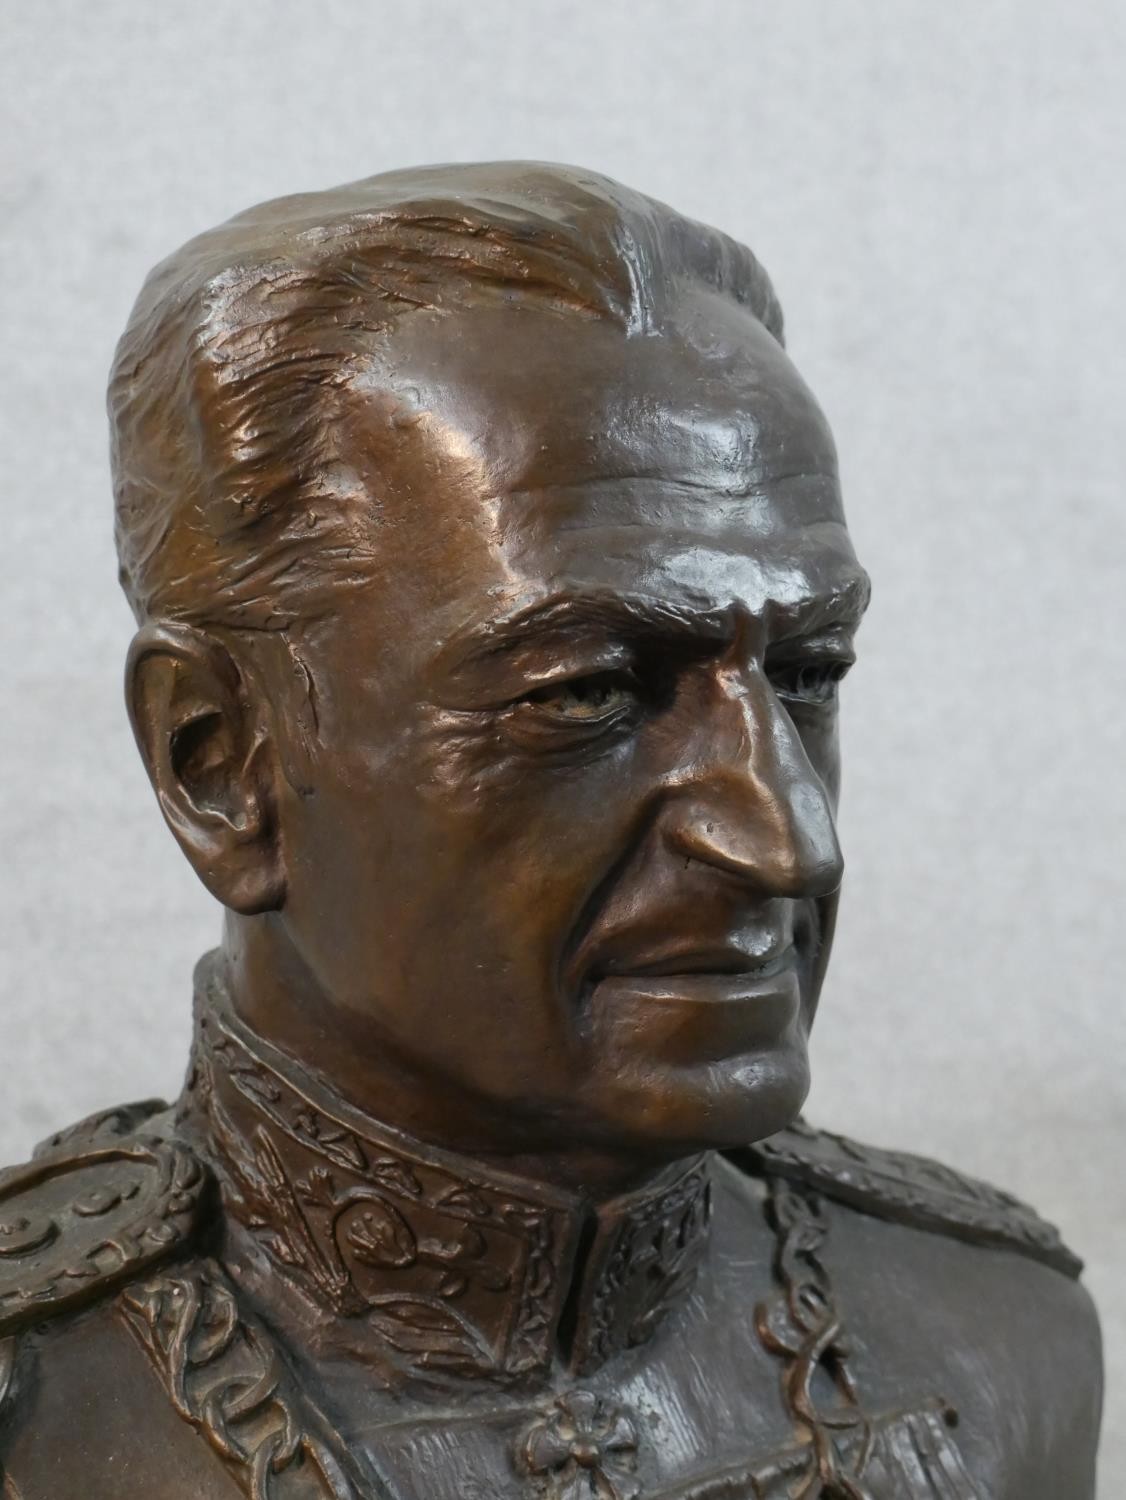 A cast bronze portrait bust of Persian Shah Mohammad Reza Pahlavi in military uniform, mounted on - Image 5 of 9